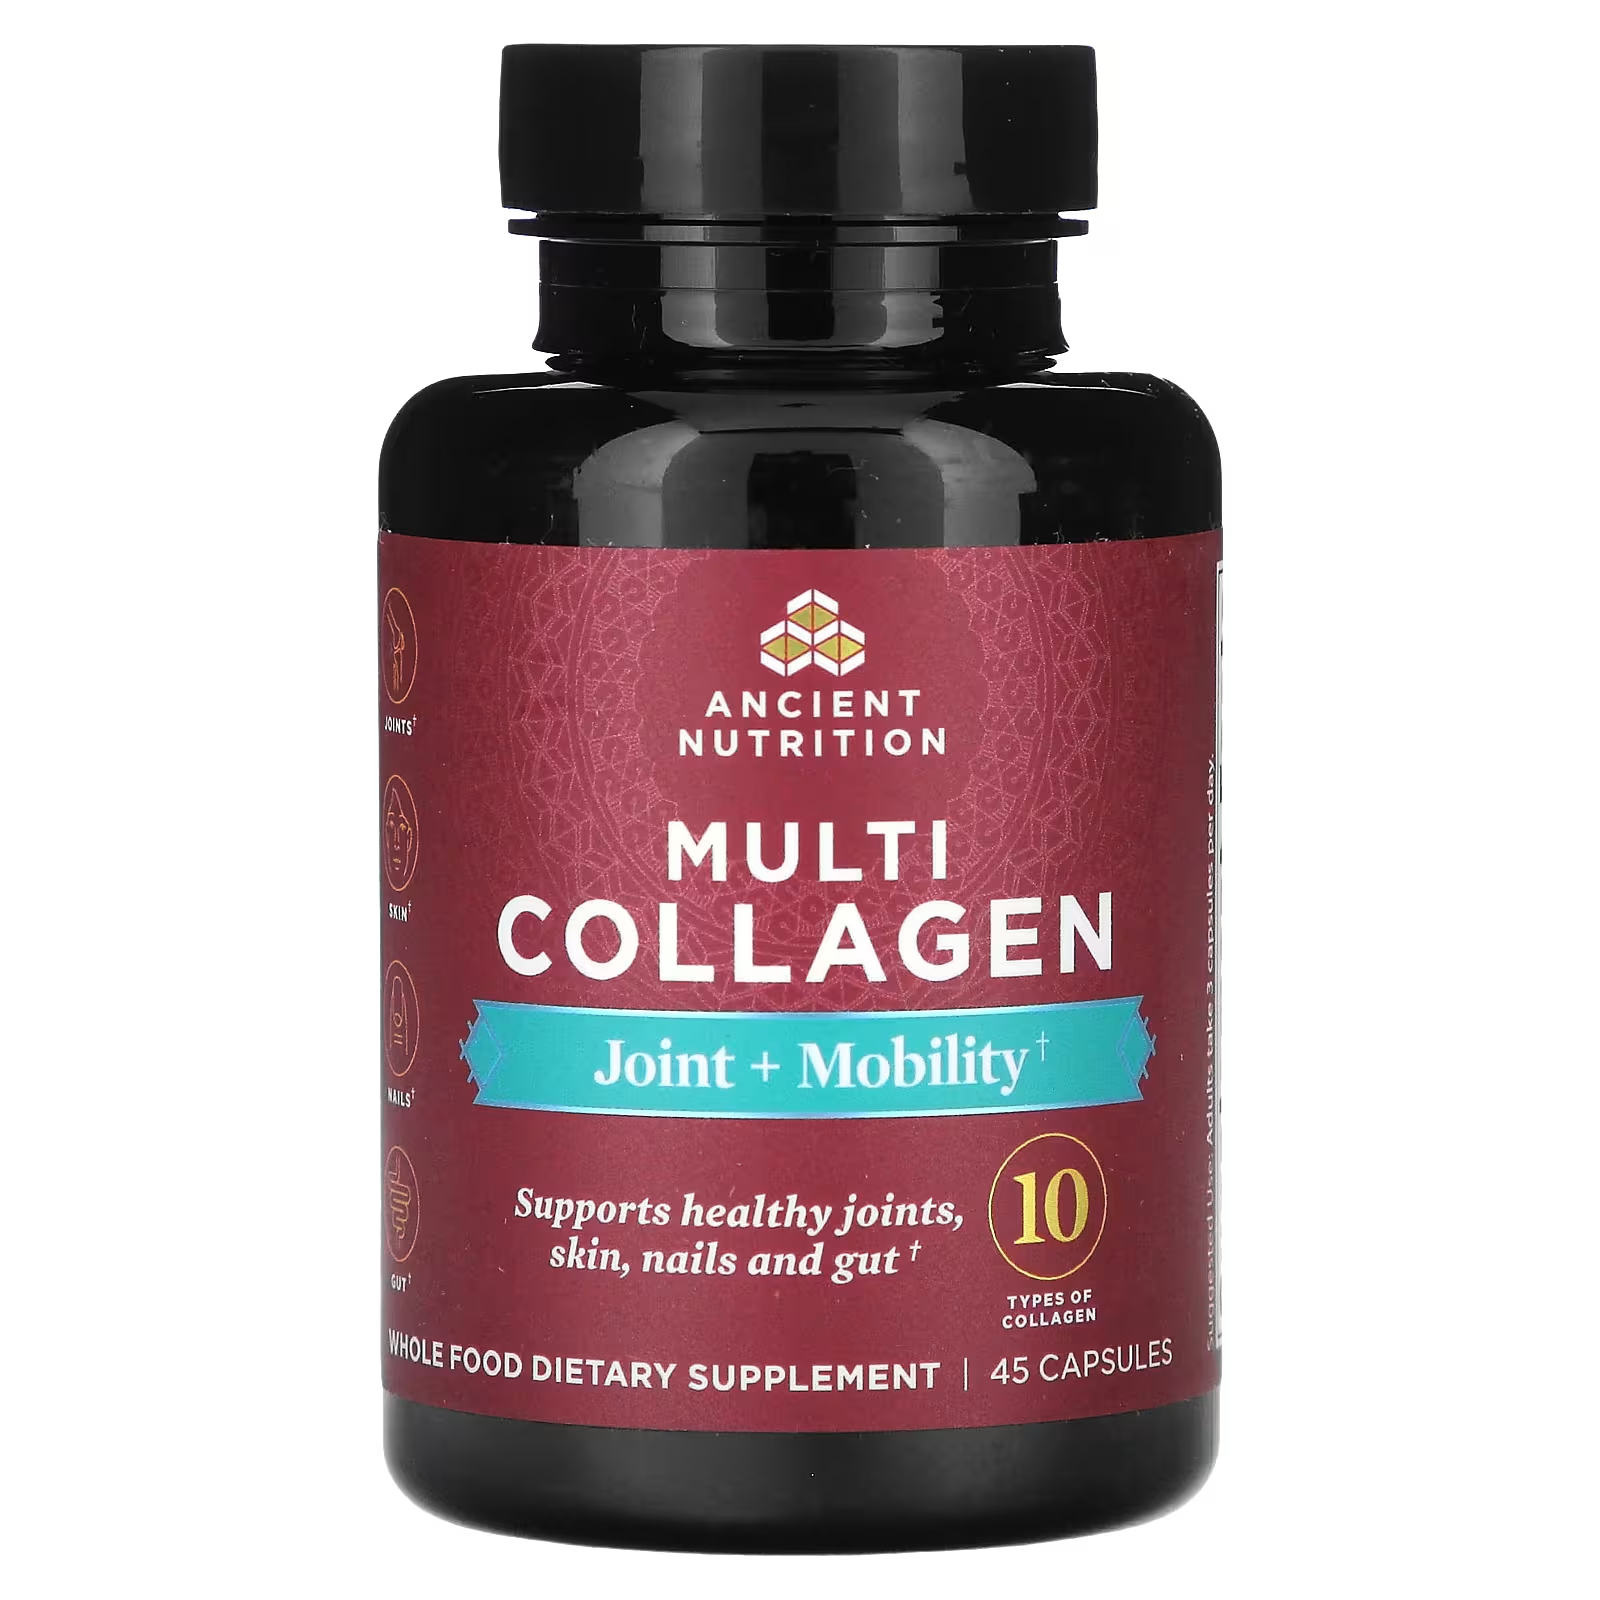 Пищевая добавка Ancient Nutrition Multi Collagen Joint + Mobility, 45 капсул пищевая добавка nature s craft multi collagen complex 120 капсул